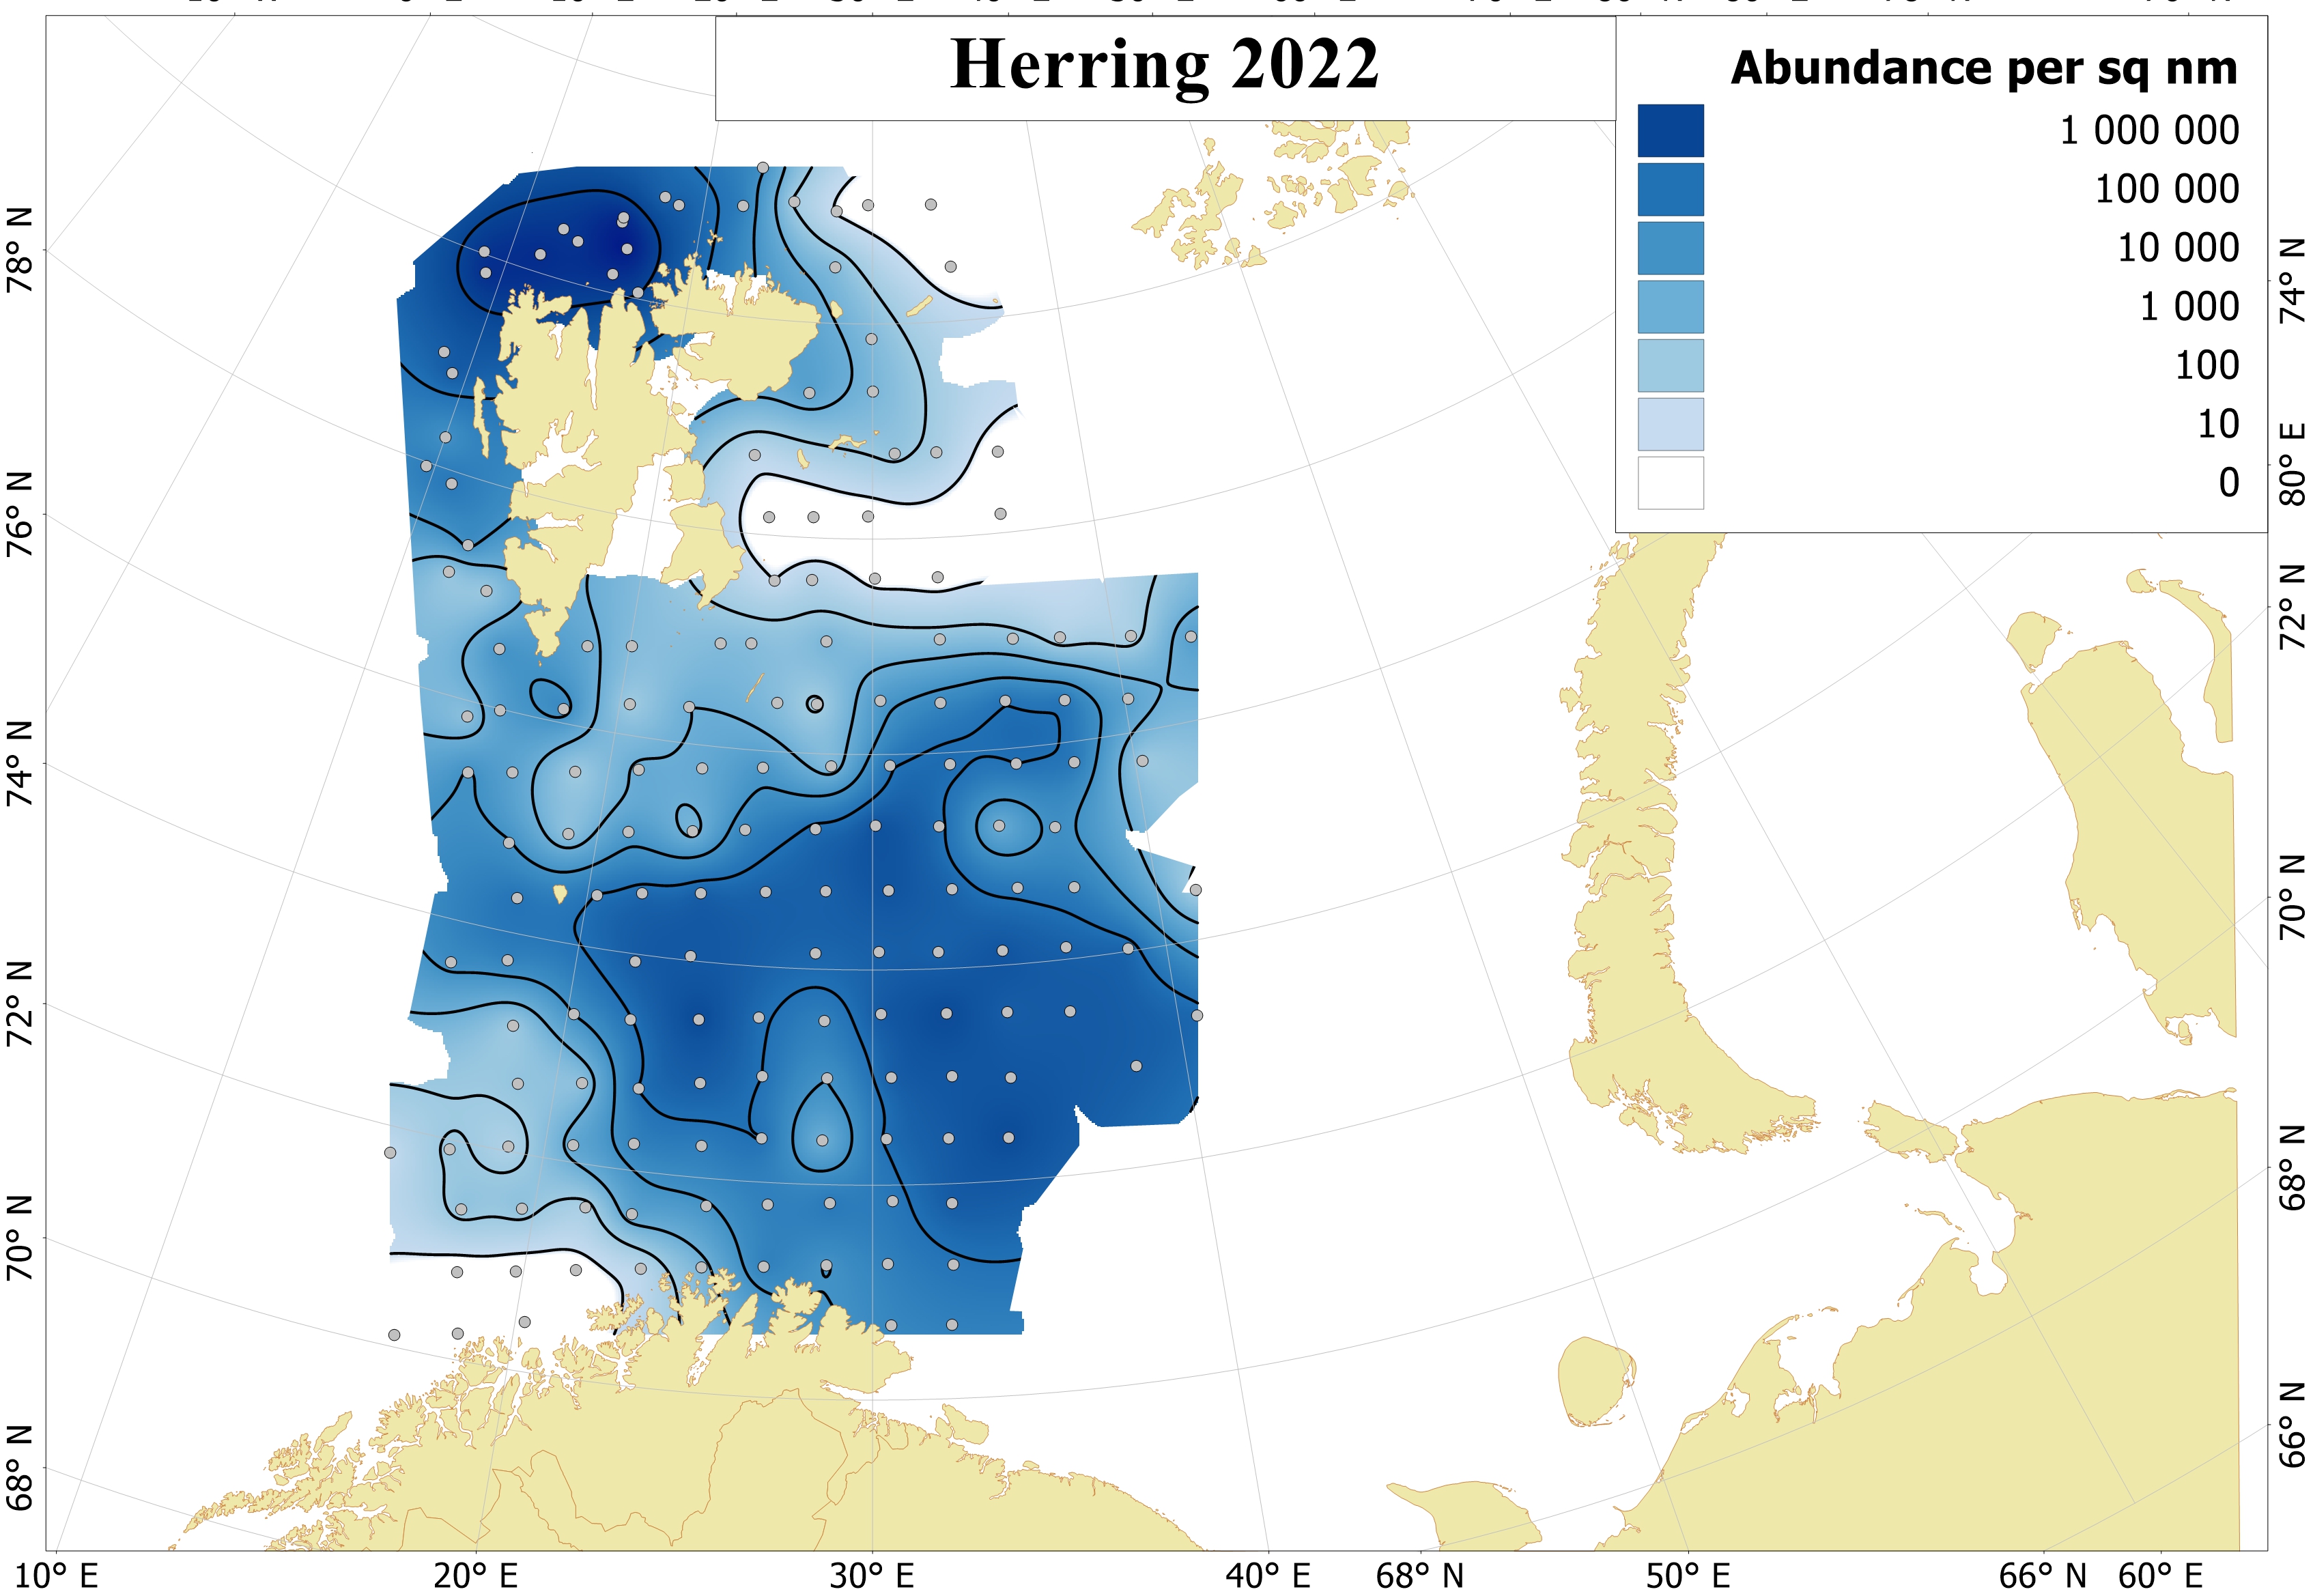 Ch 6 Distribution of 0-group herring 2022